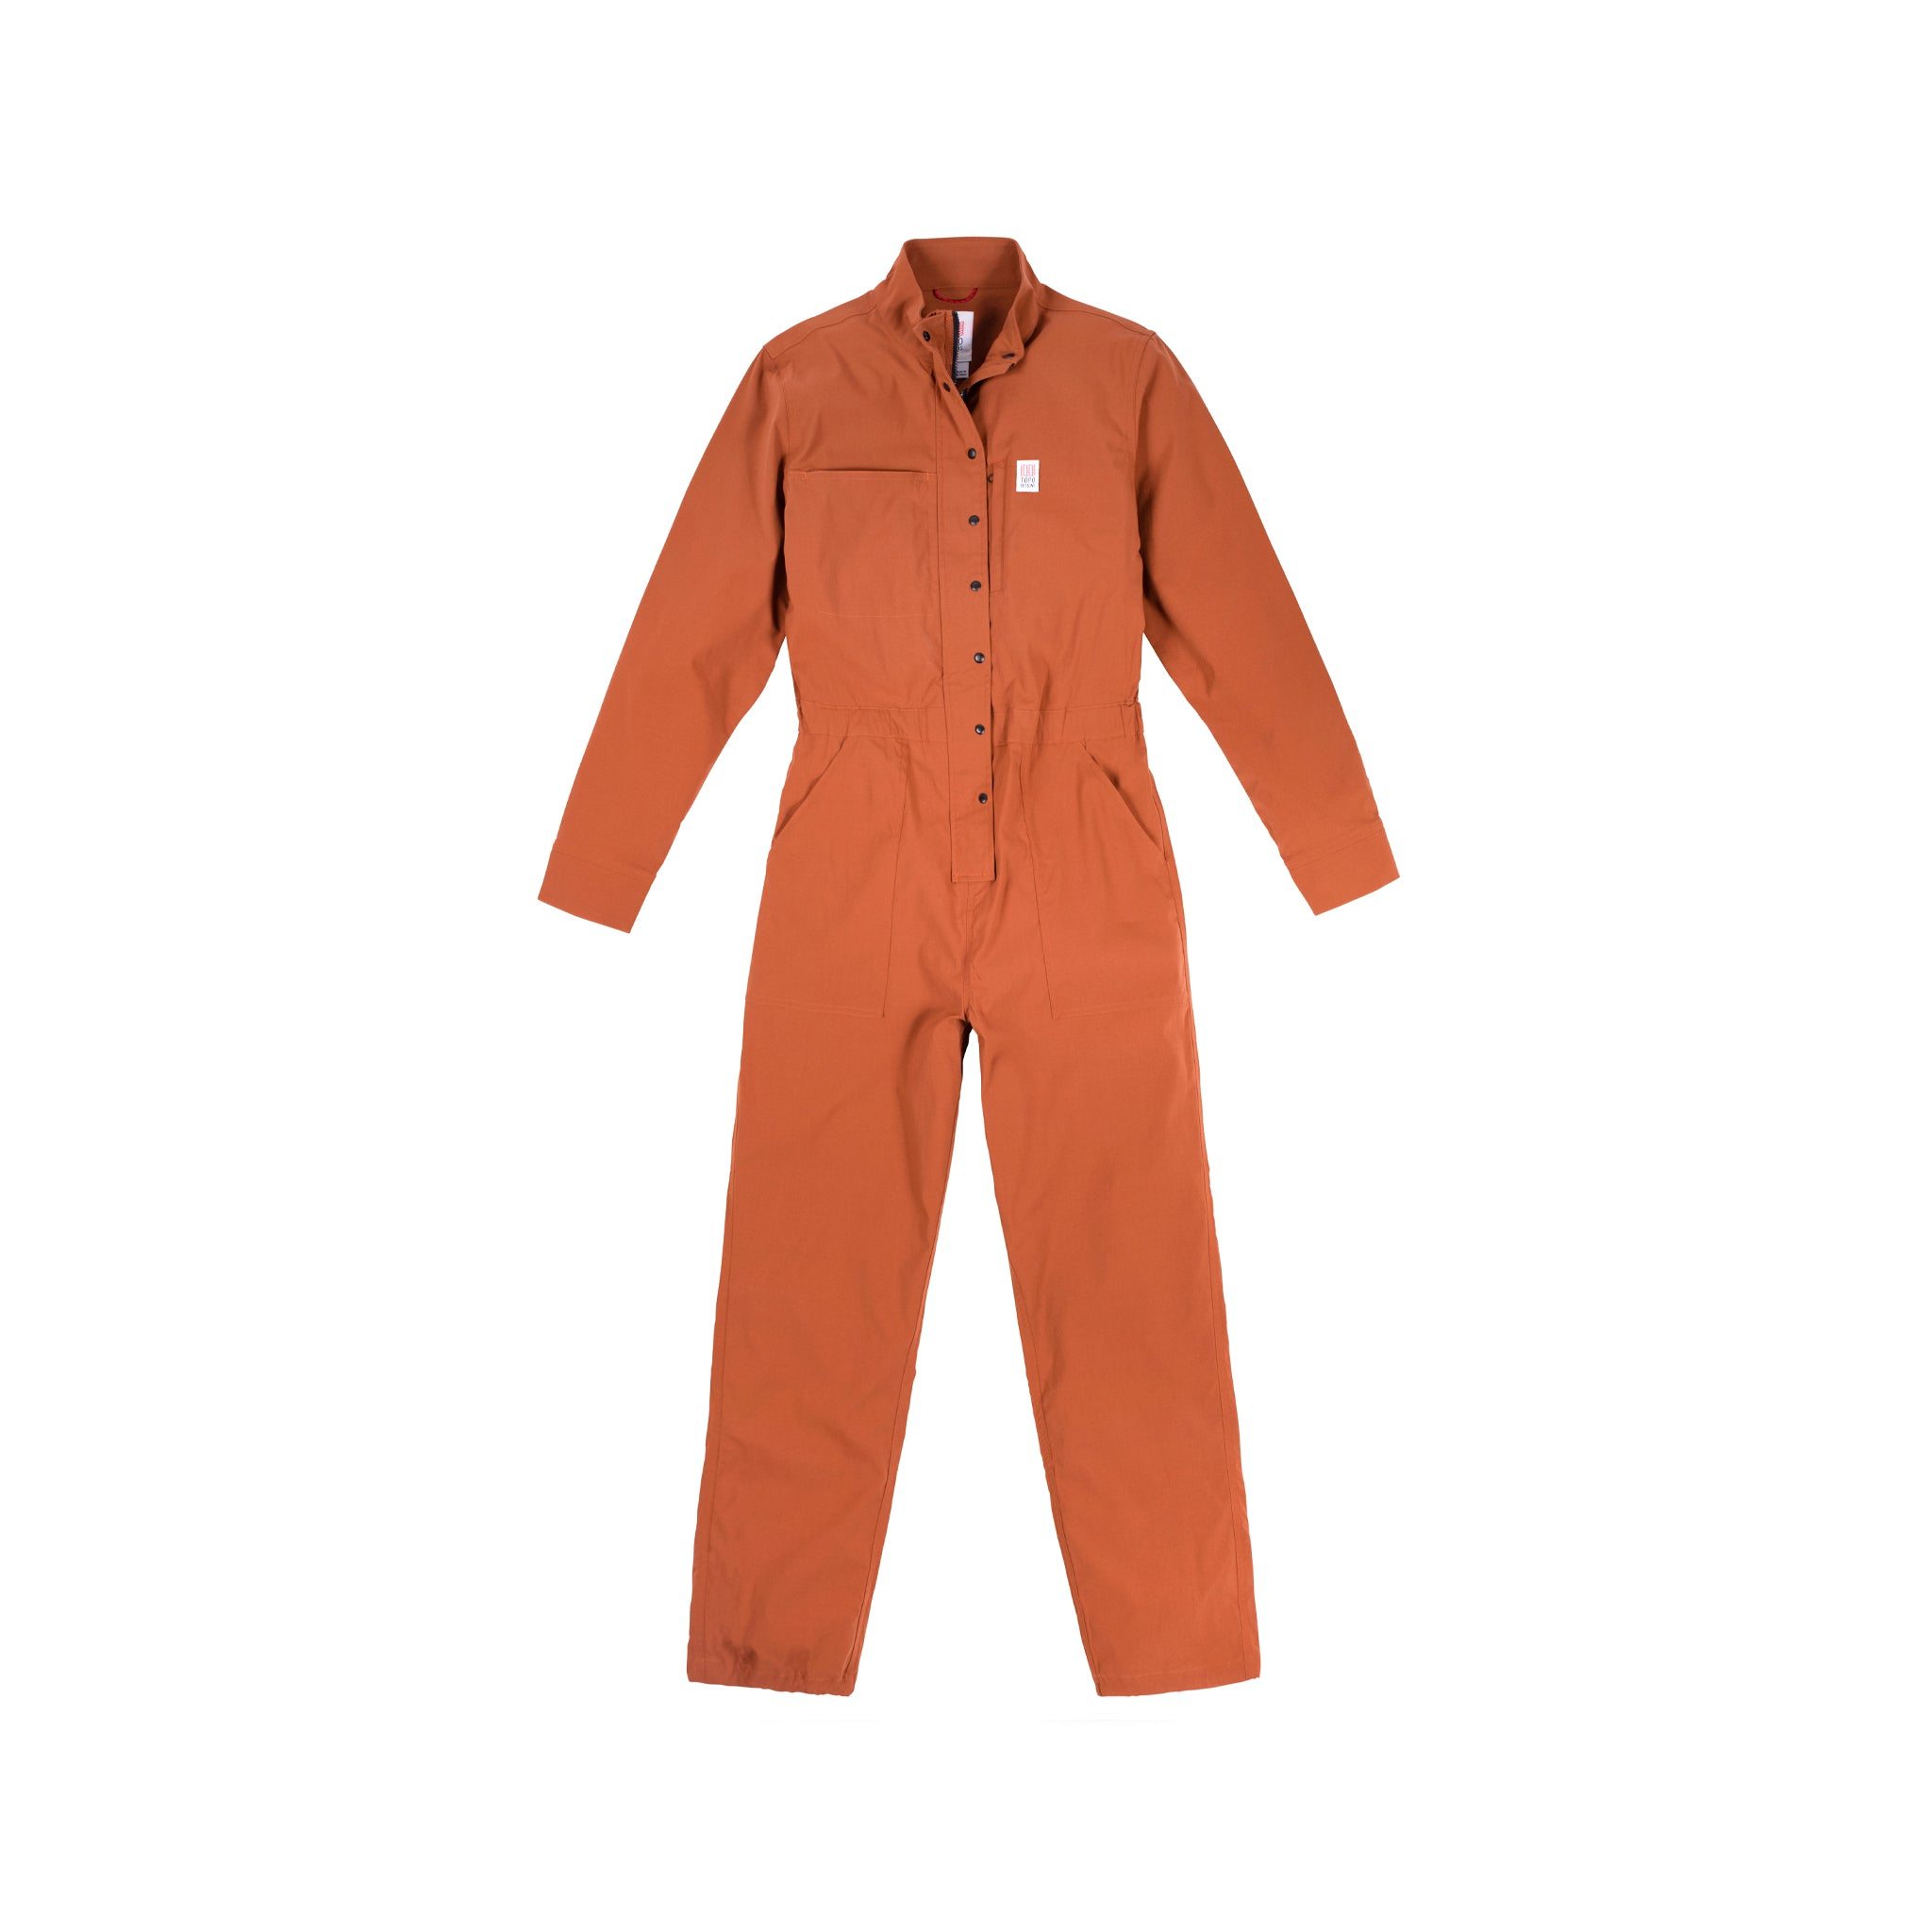 Coverall - Women's - Brick / Large